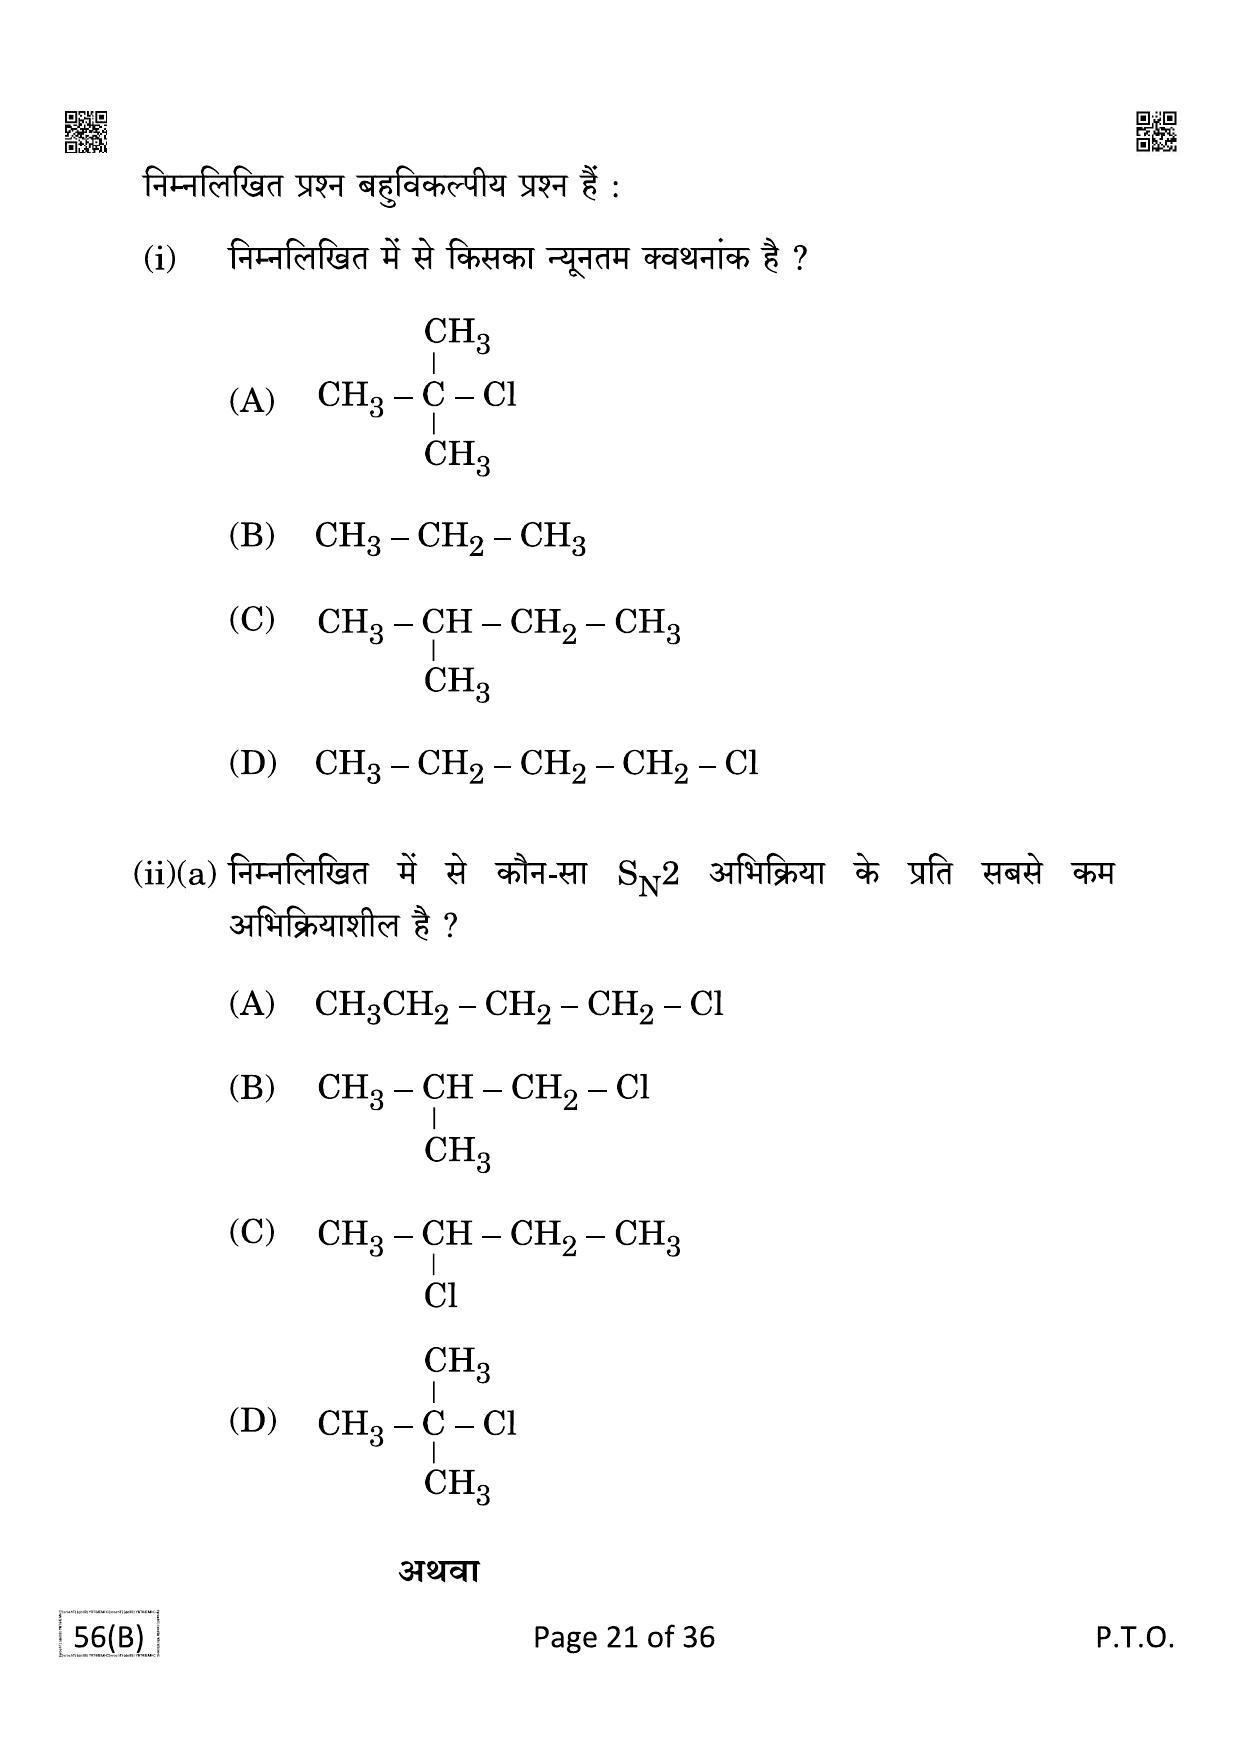 CBSE Class 12 QP_043_CHEMISTRY_FOR_BLIND_CANDIDATES 2021 Compartment Question Paper - Page 21